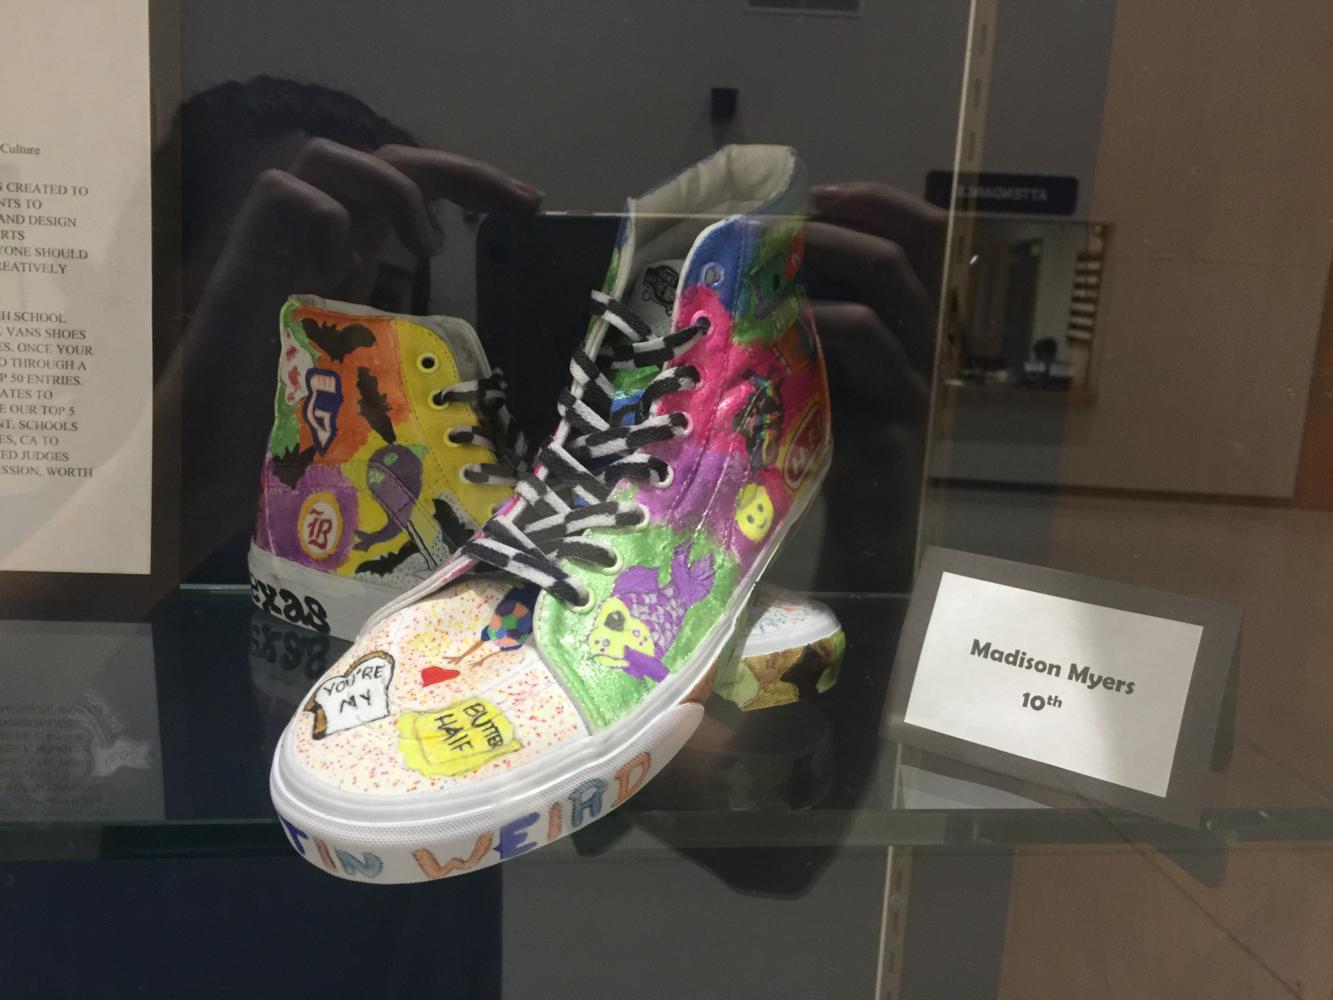 Art students compete in VANS design competition The Growl